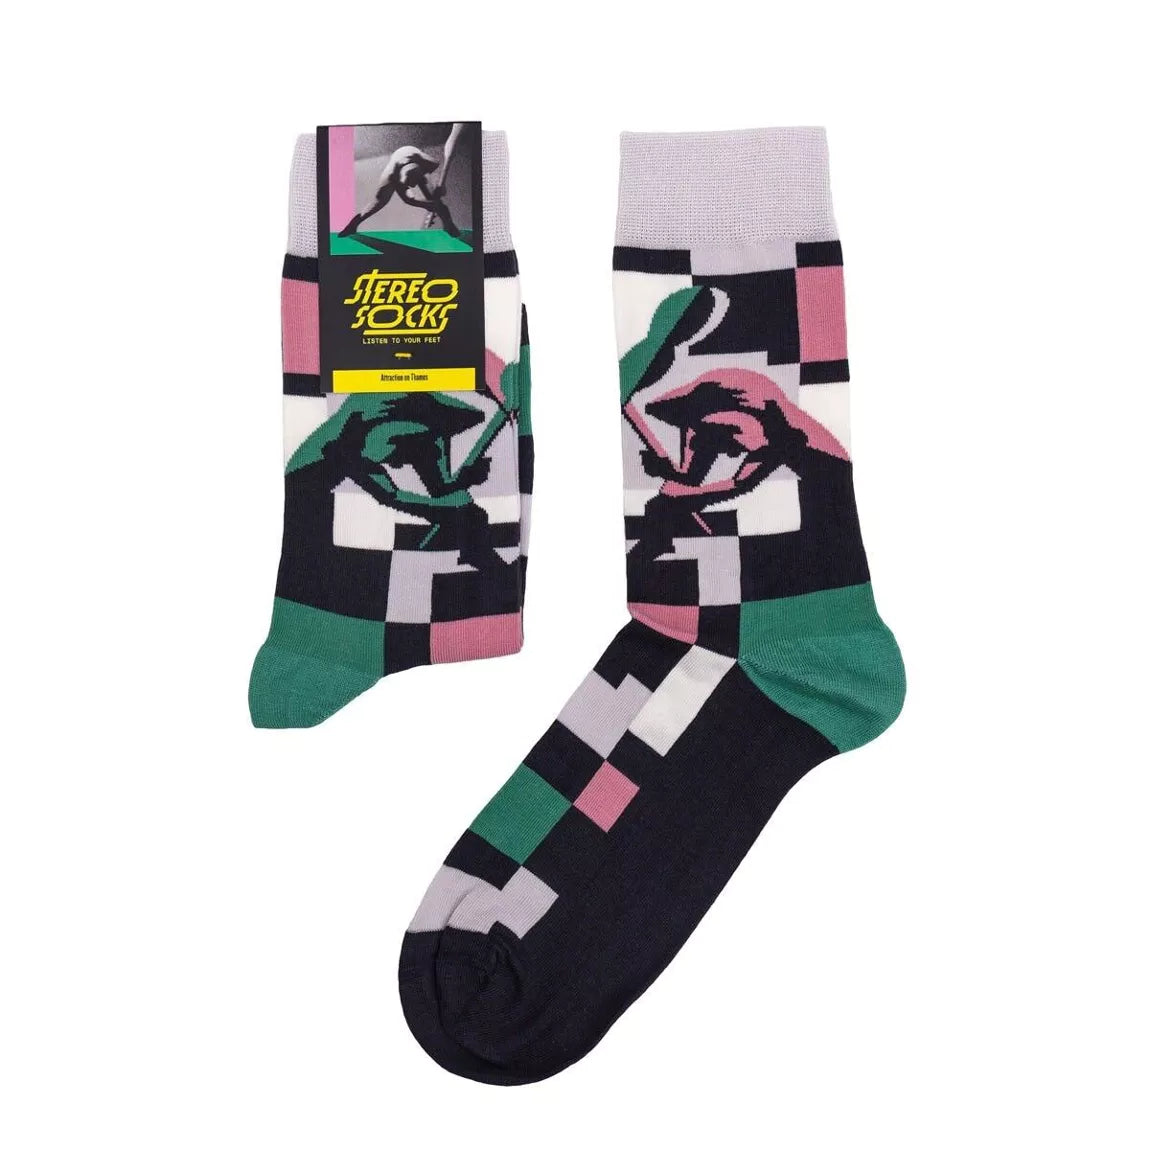 The Clash Attraction-on-Thames Socks